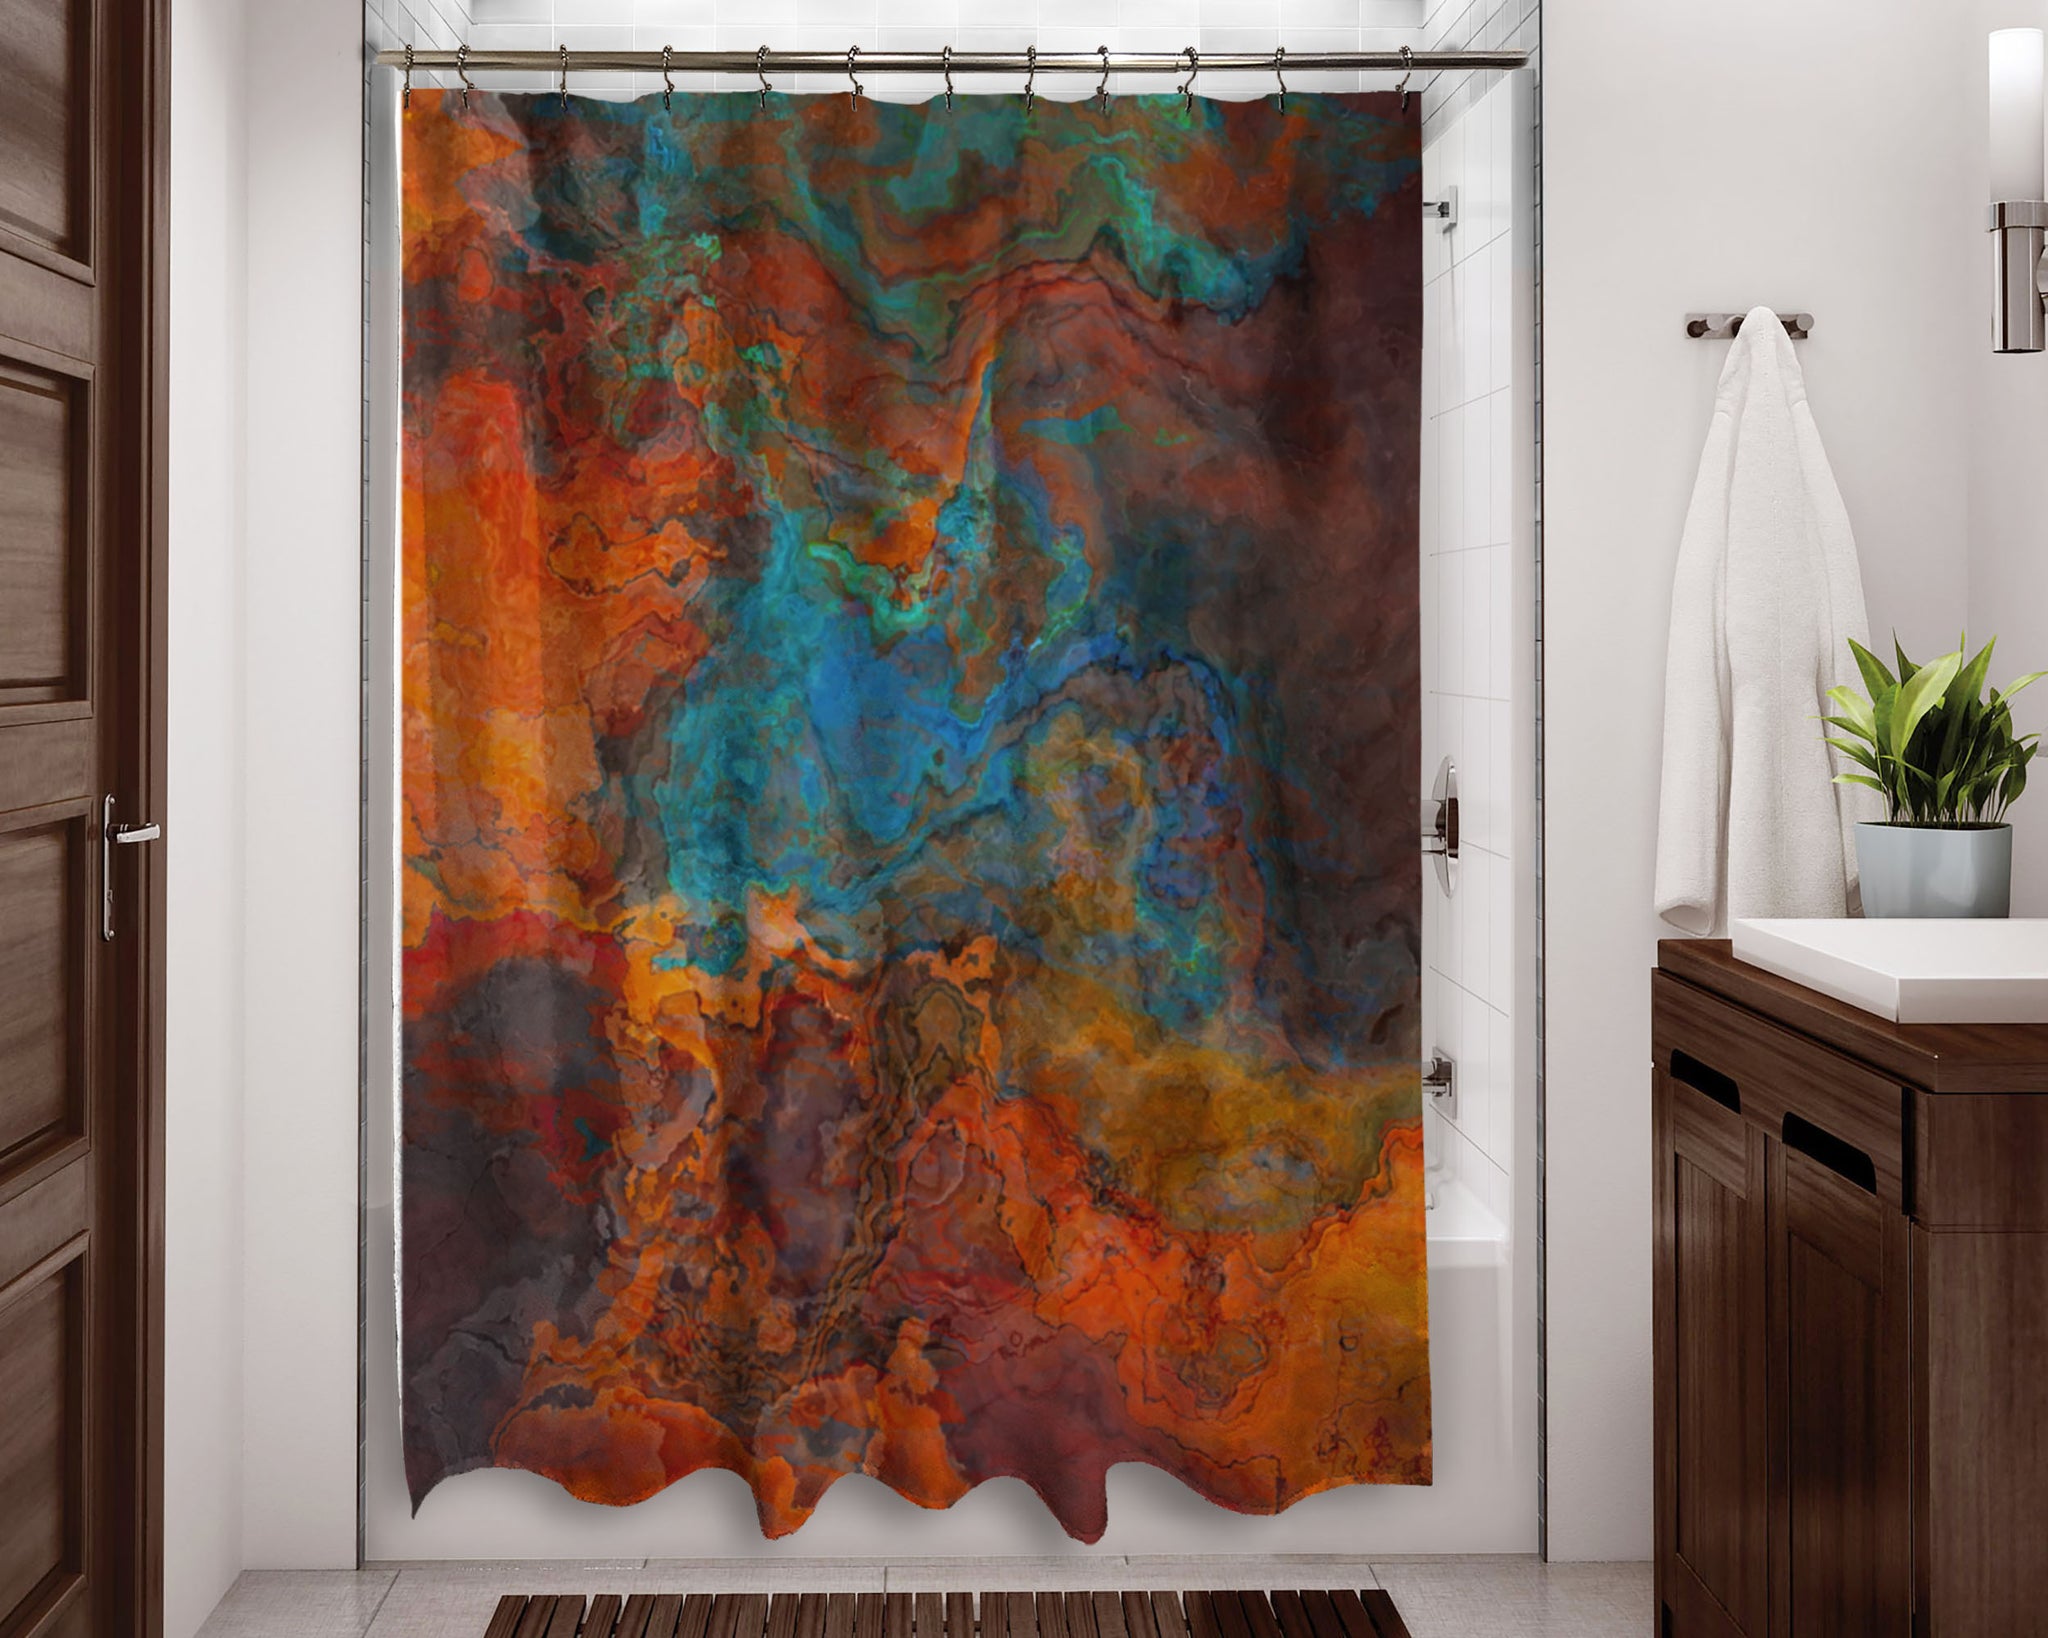 Abstract Shower Curtain Orange Brown Turquoise Contemporary Bathroom Art Home